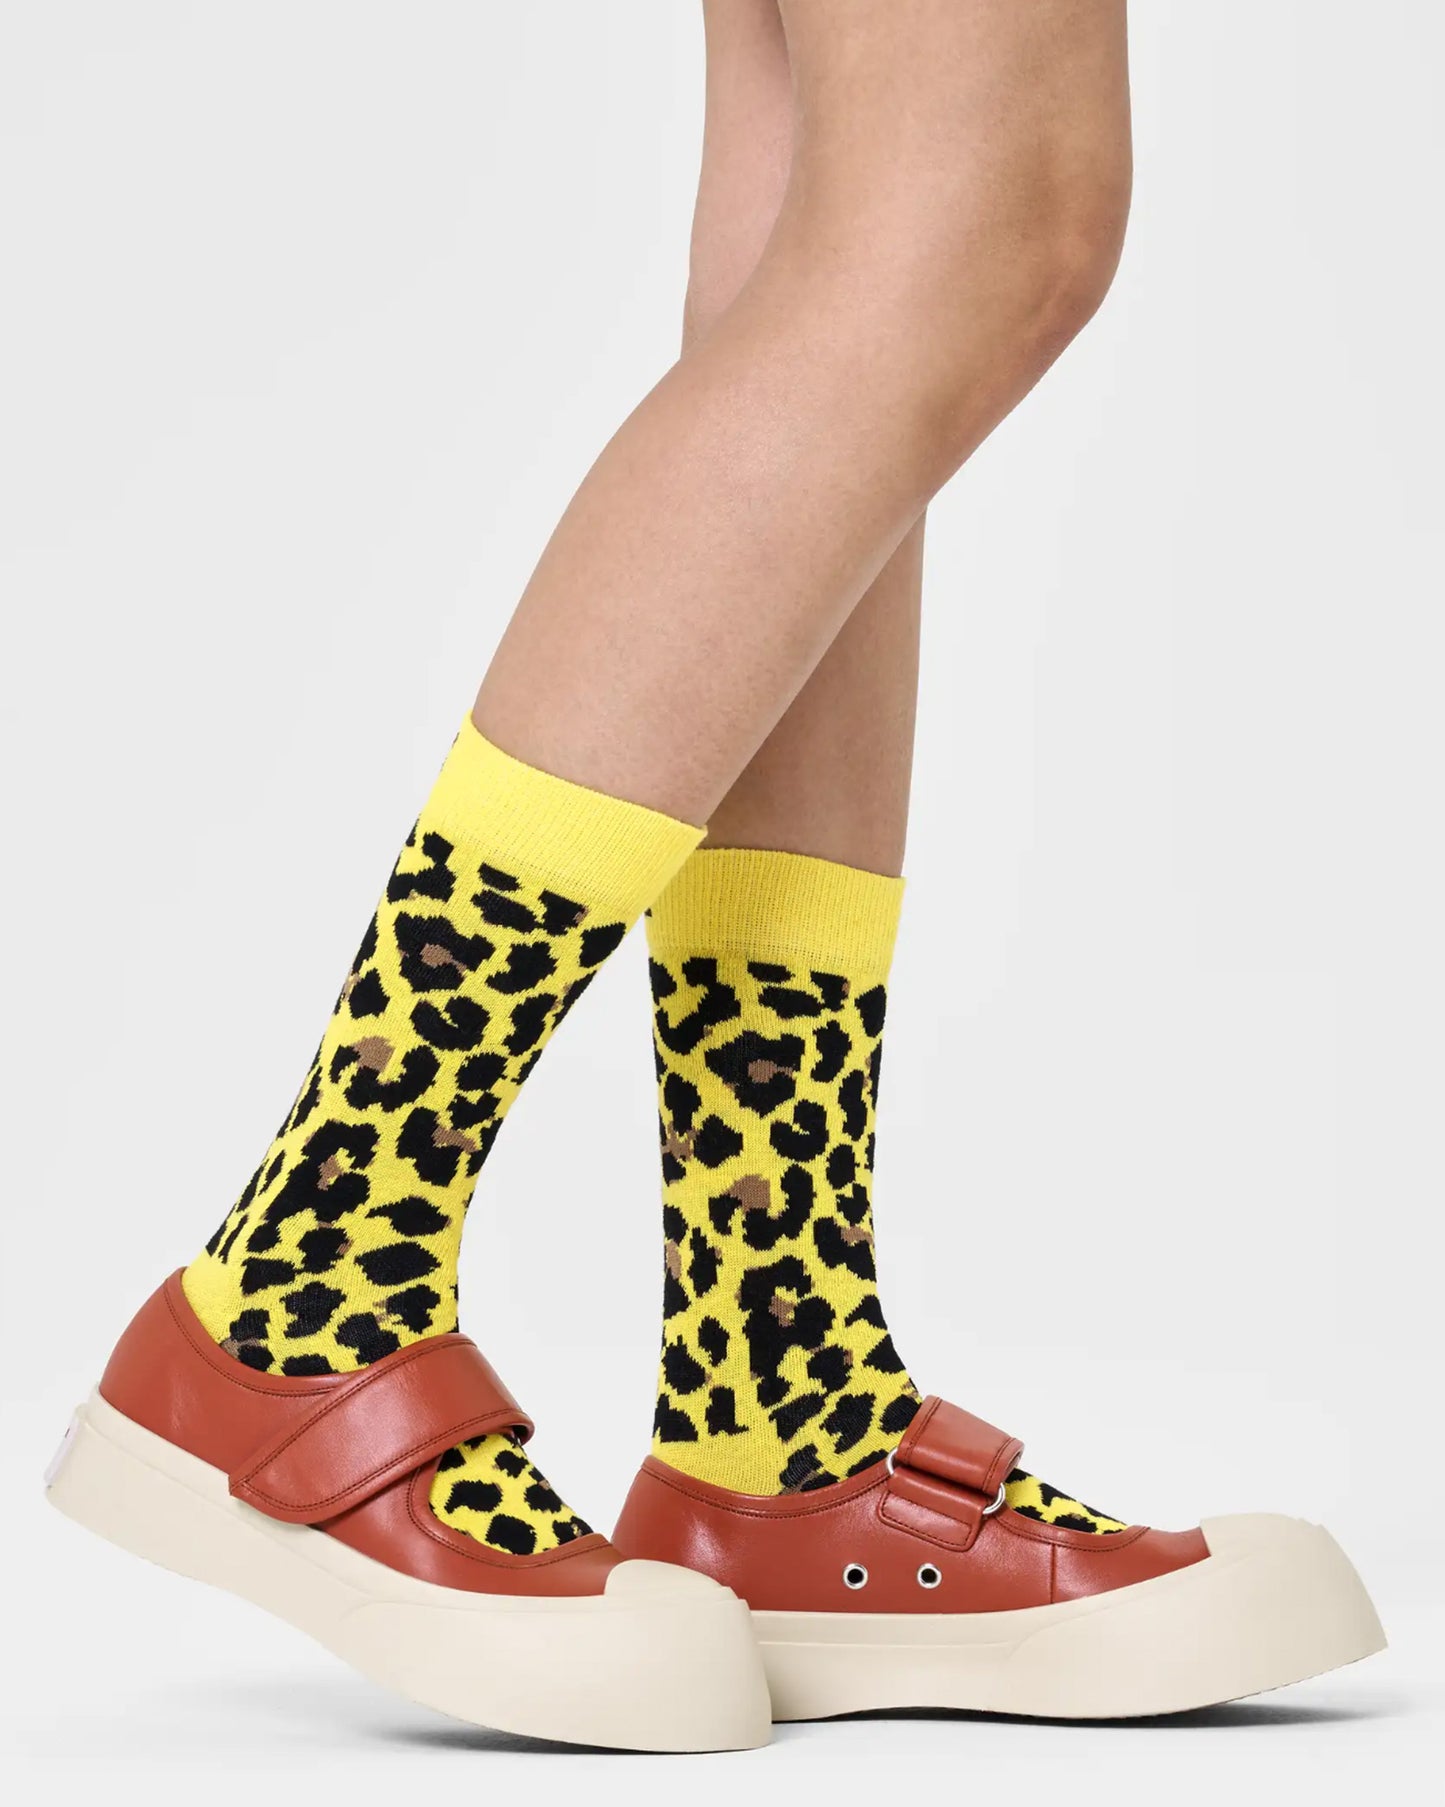 Happy Sock P000755 Leo Sock - Yellow cotton crew length ankle socks with a black and brown leopard print pattern. Worn with tan leather chunky shoes.